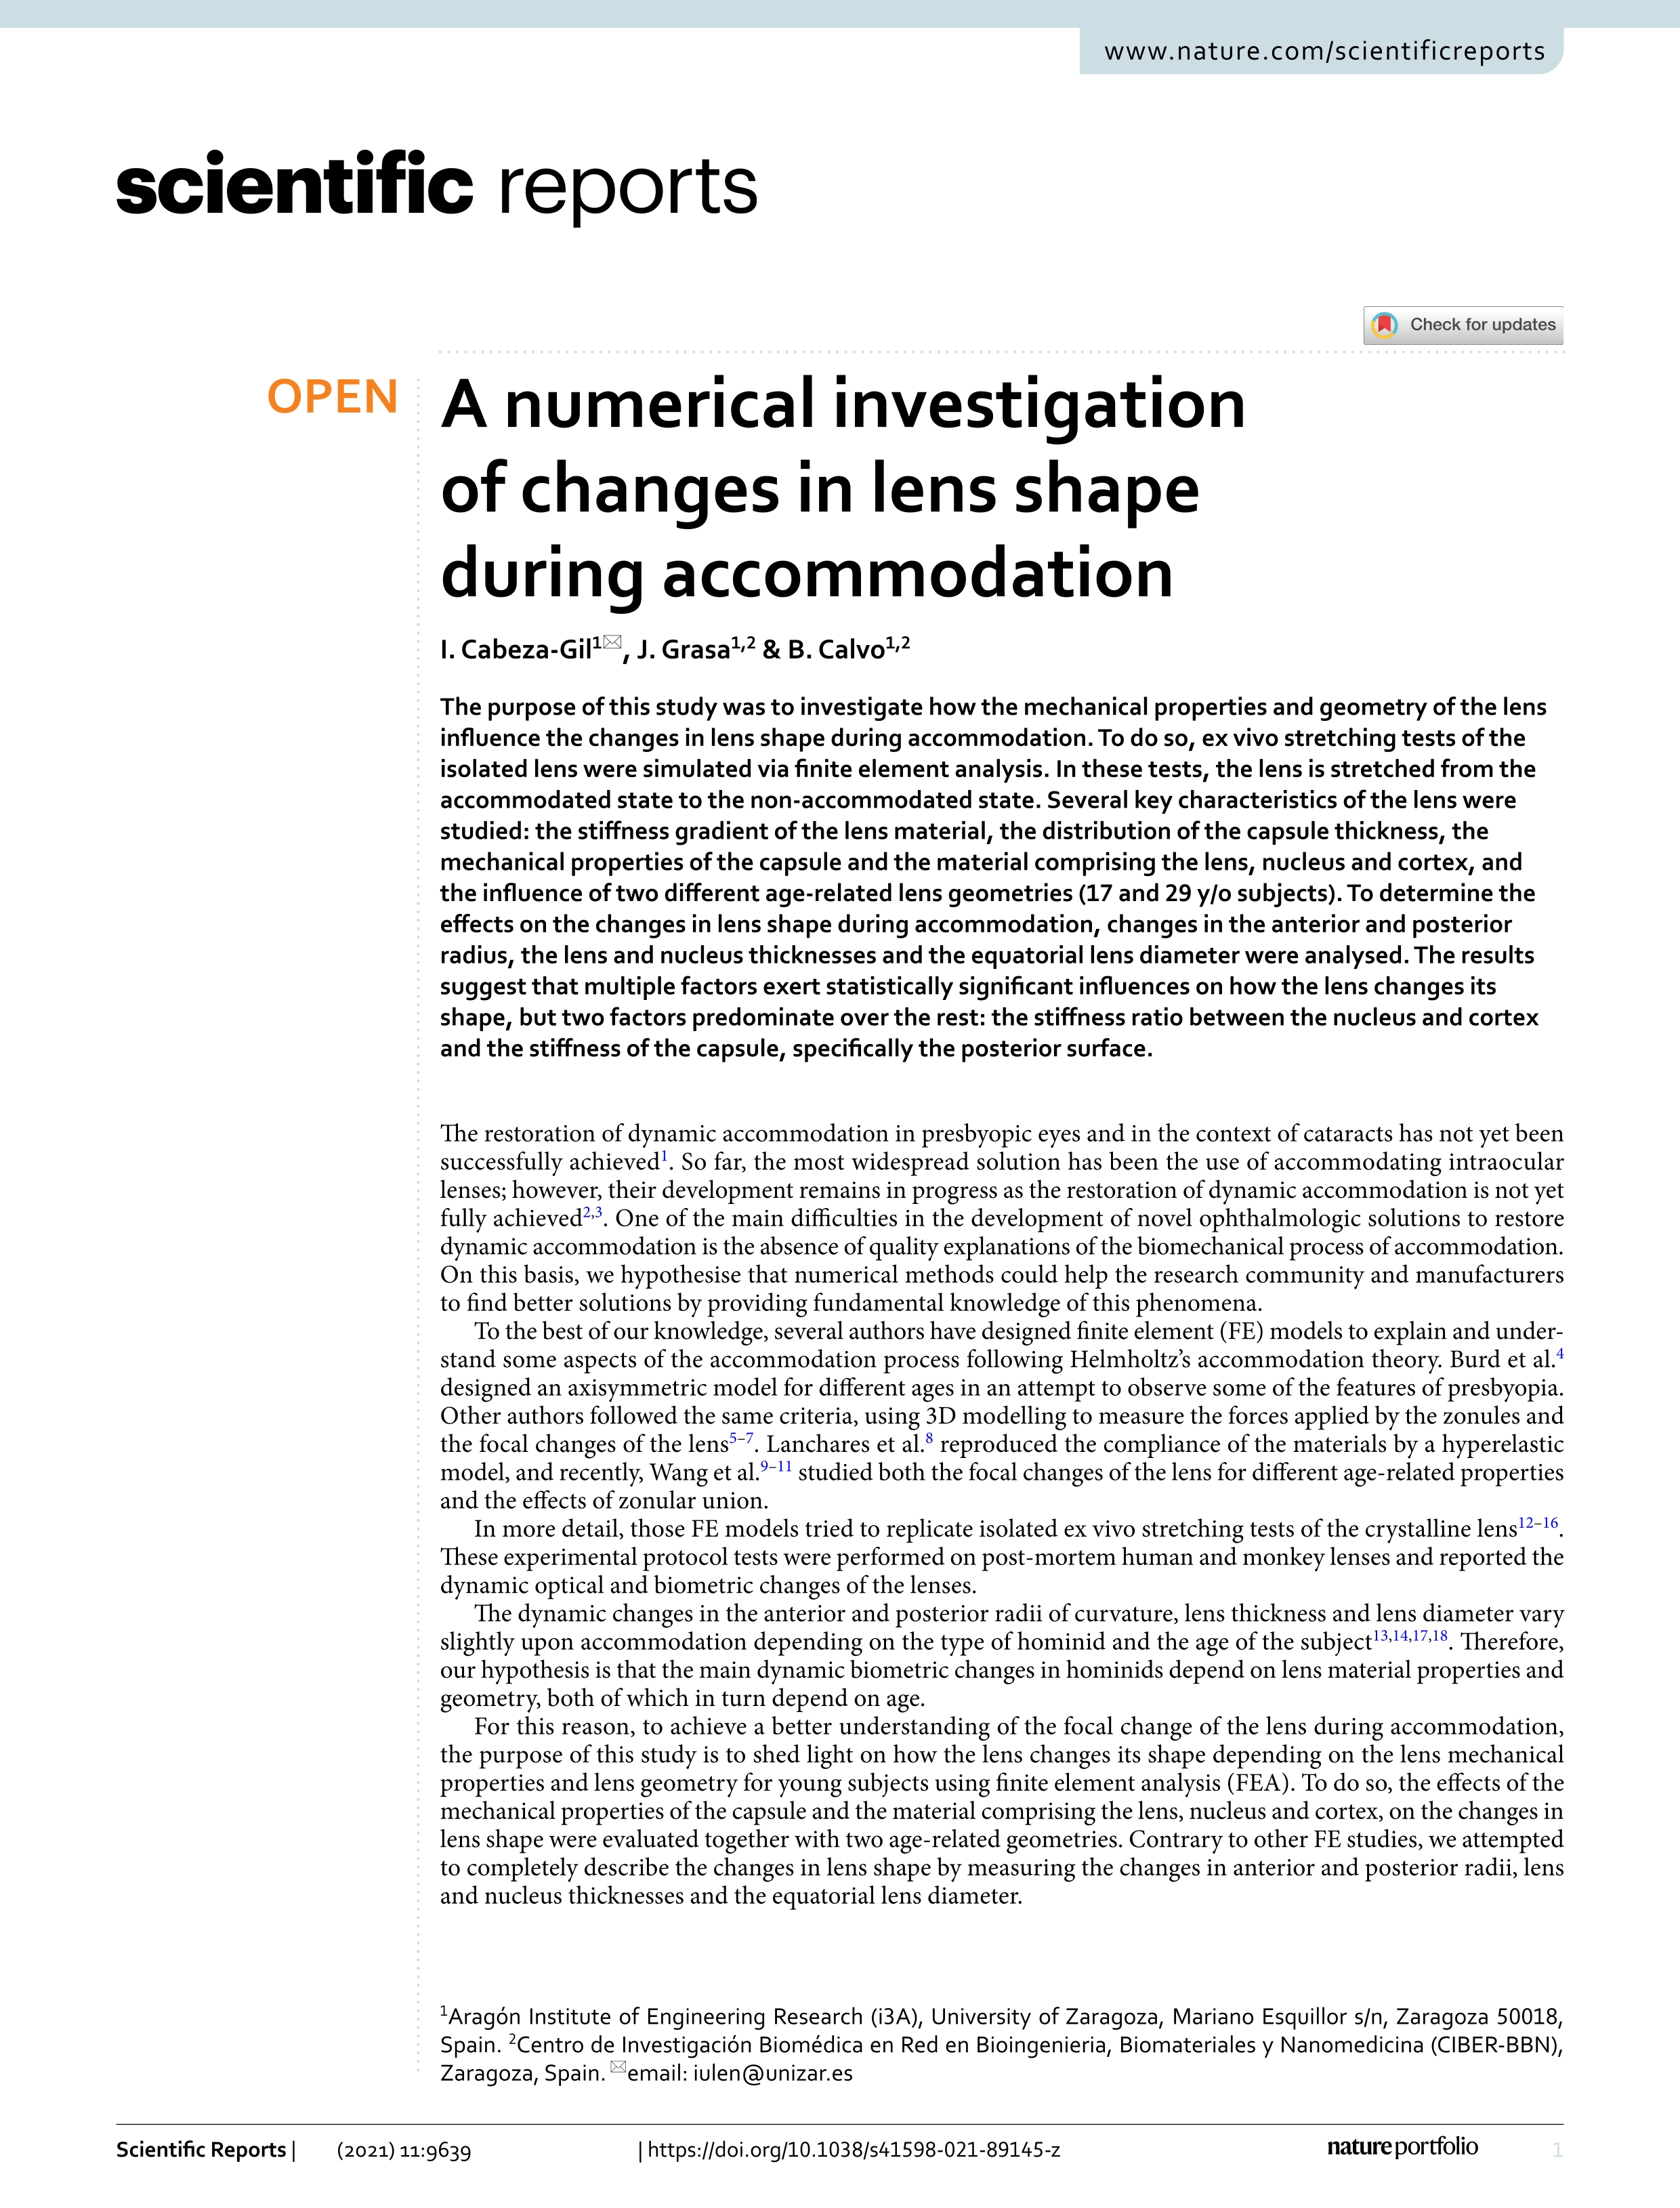 A numerical investigation of changes in lens shape during accommodation